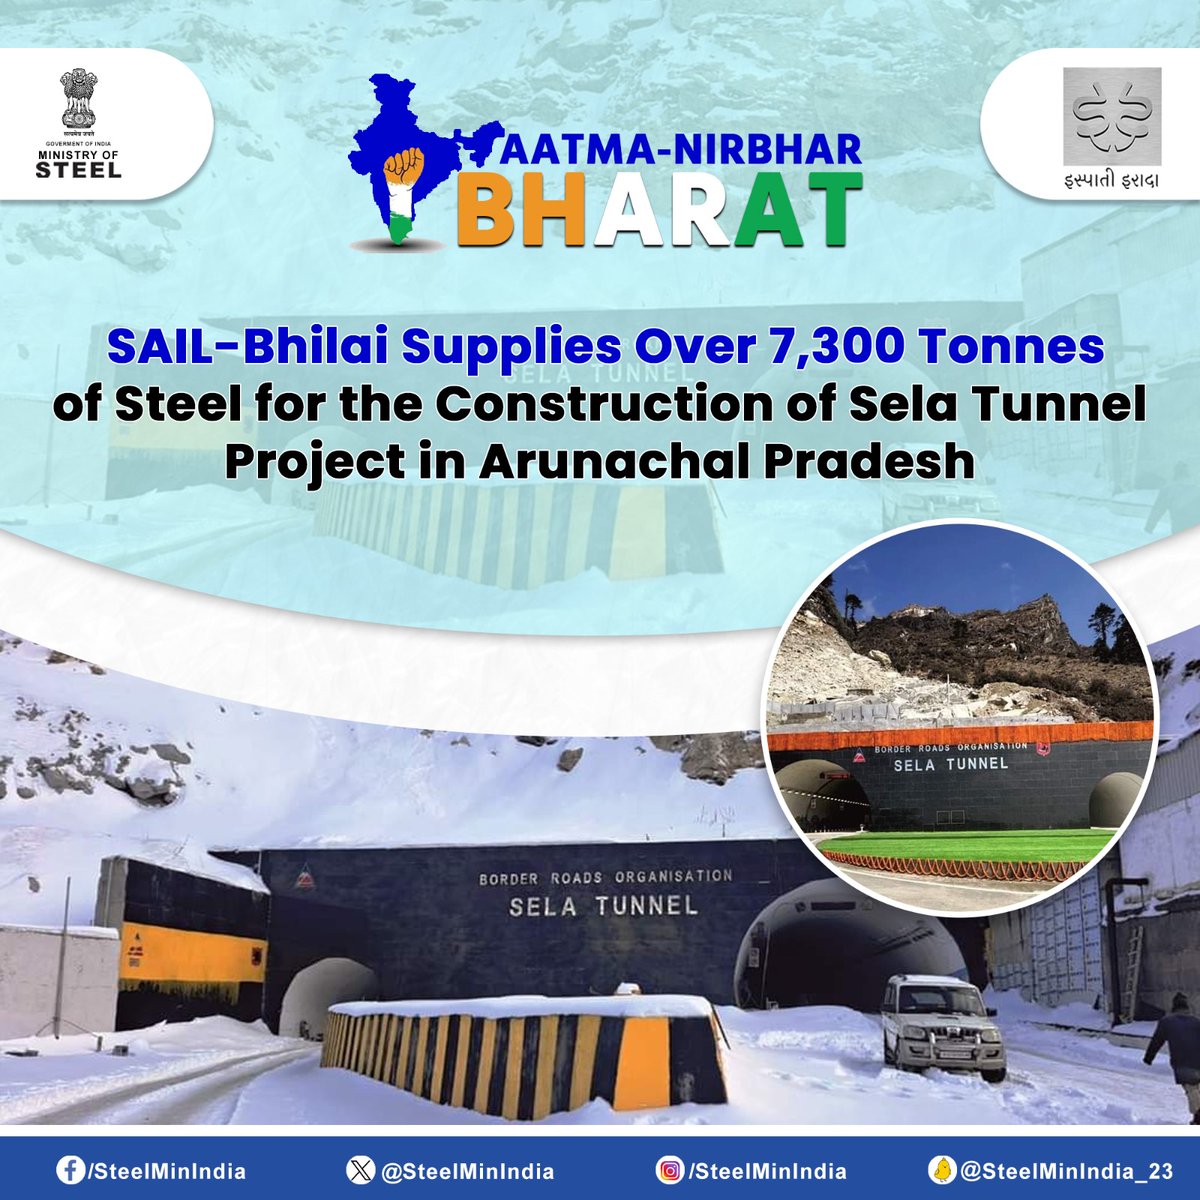 Steel plays a vital role! SAIL-Bhilai contributes over 7,300 tonnes of steel in the construction of the strategic Sela Tunnel Project in Arunachal Pradesh, enhancing connectivity at high altitudes.

#SAIL #BhilaiSteelPlant #SelaTunnelProject #ArunachalPradesh #AatmanirbharBharat